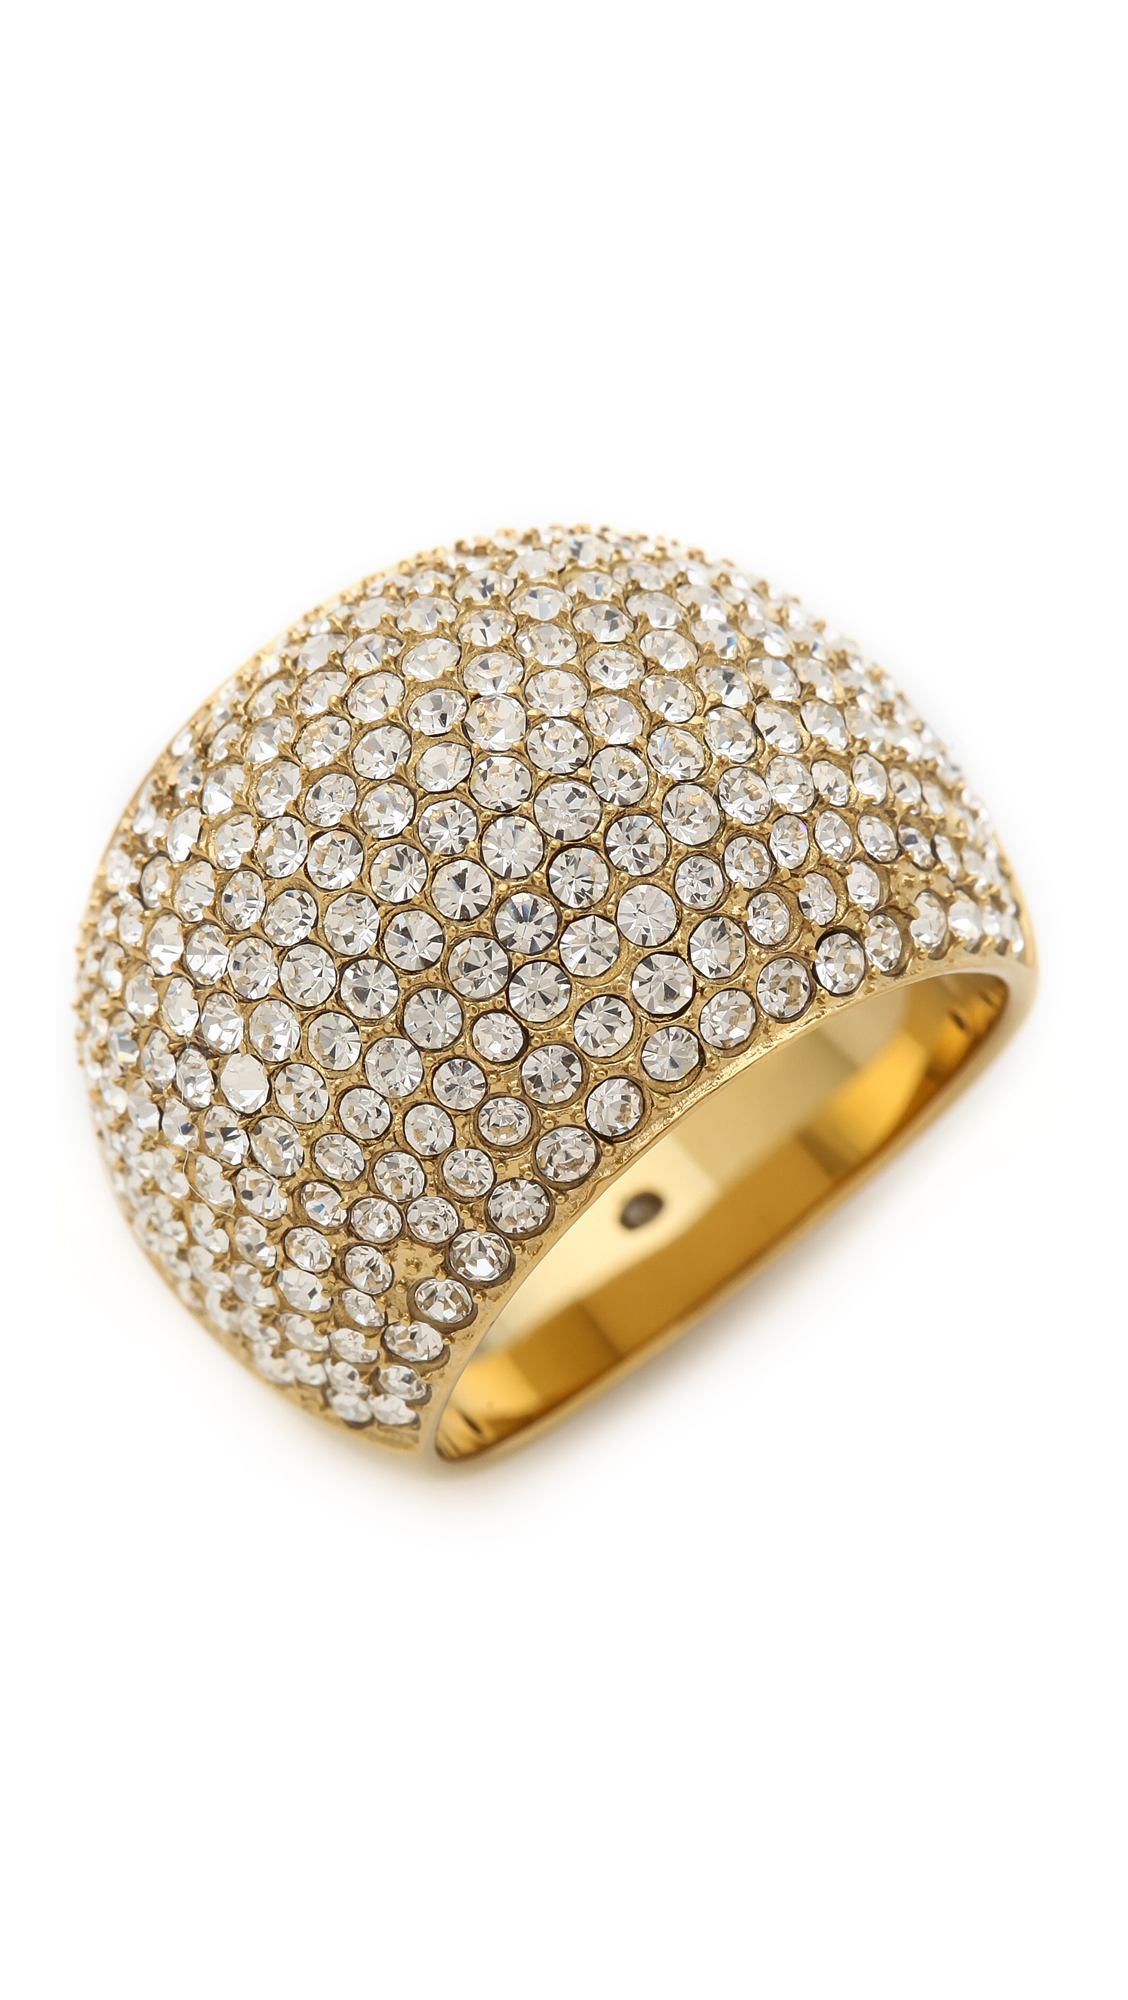 Michael Kors Pave Dome Ring - Gold/Clear in Metallic | Lyst